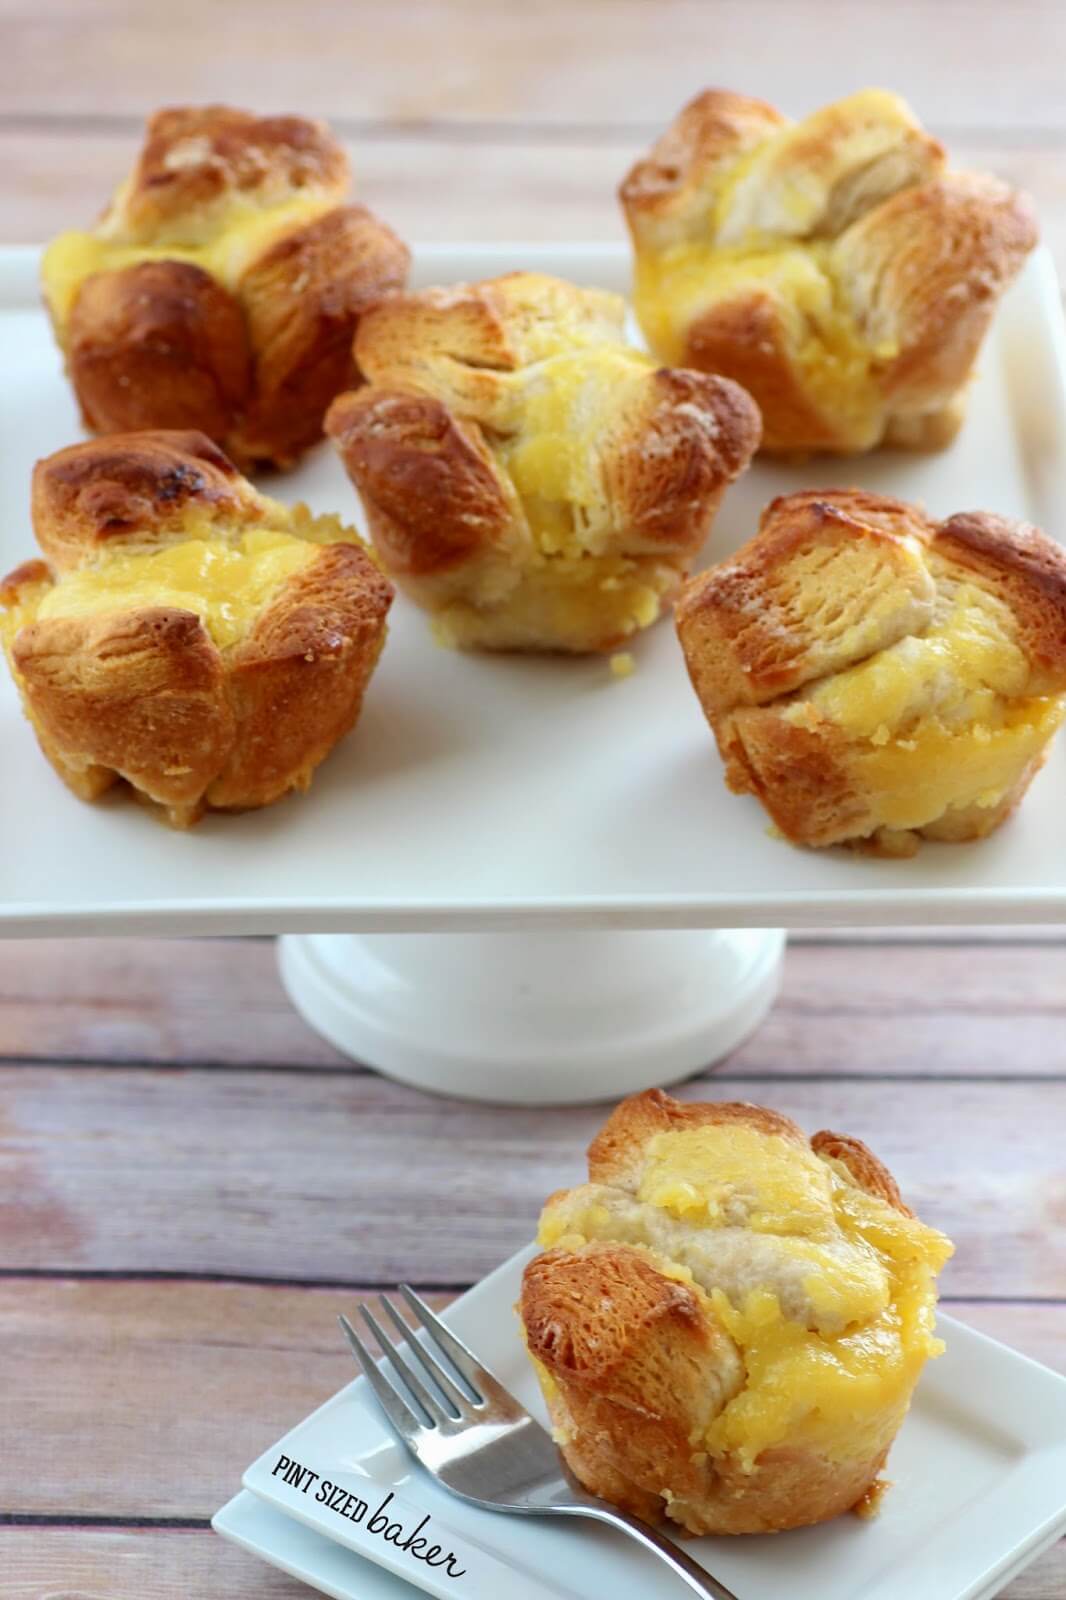 Your family is going to love this easy Lemon Curd Monkey Bread for breakfast and dessert. It's easy to make with just four store bought ingredients. Make some for a weekend treat!